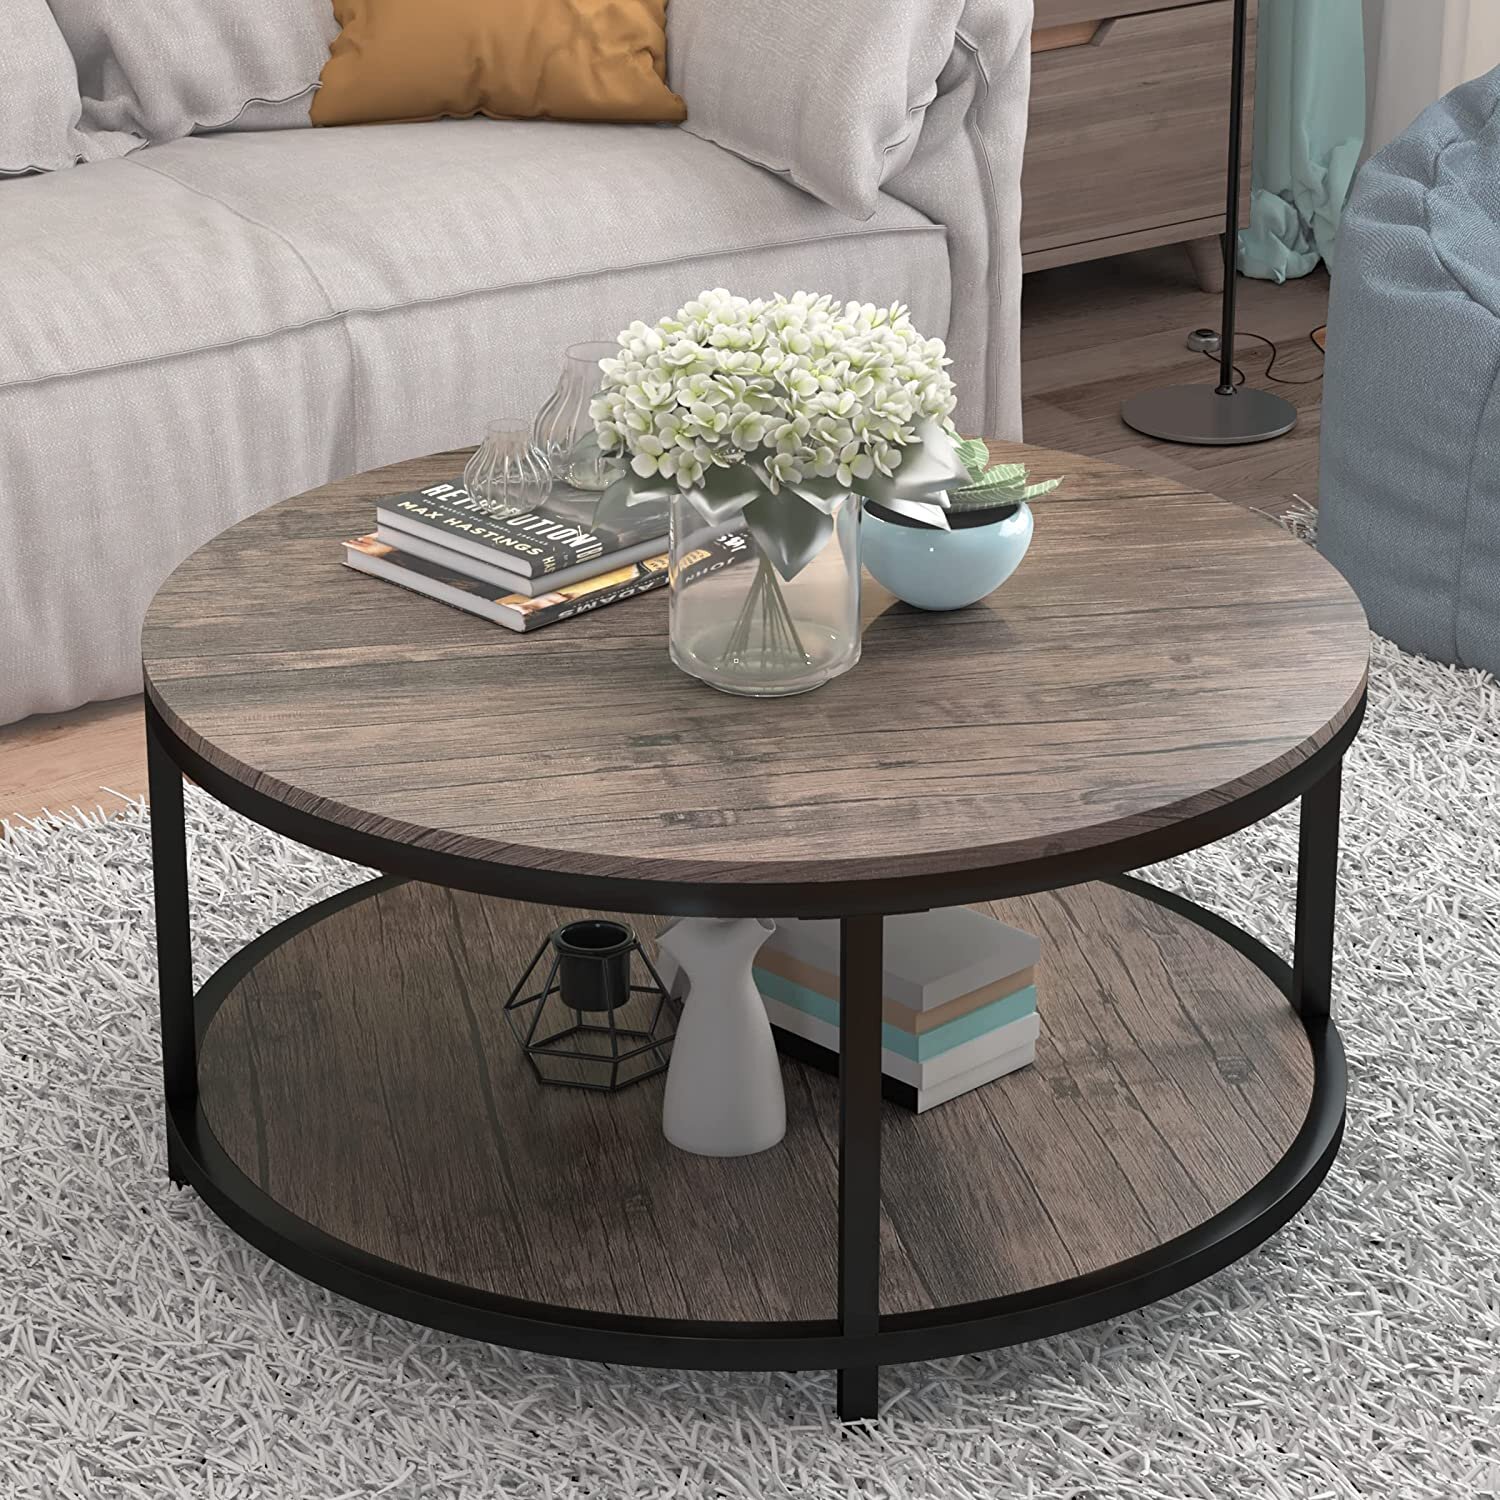 Eoghan Lift Top Frame Coffee Table with Storage Millwood Pines Color: Espresso